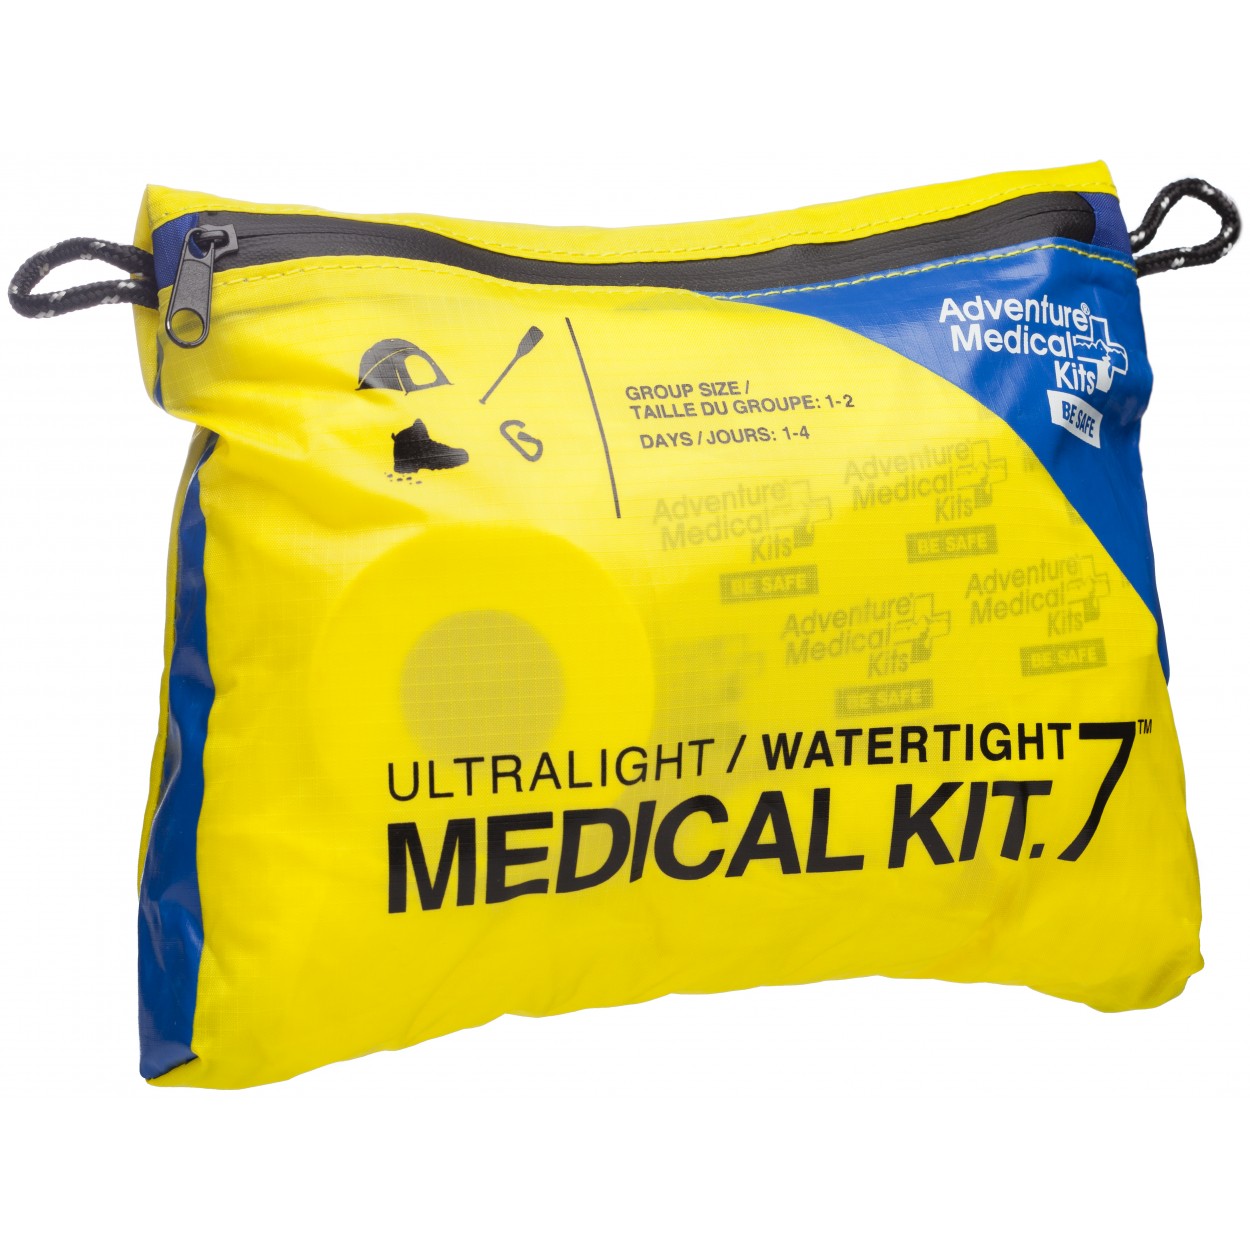 Useful travel gifts - Adventure Medical Kits UltraLight and Watertight